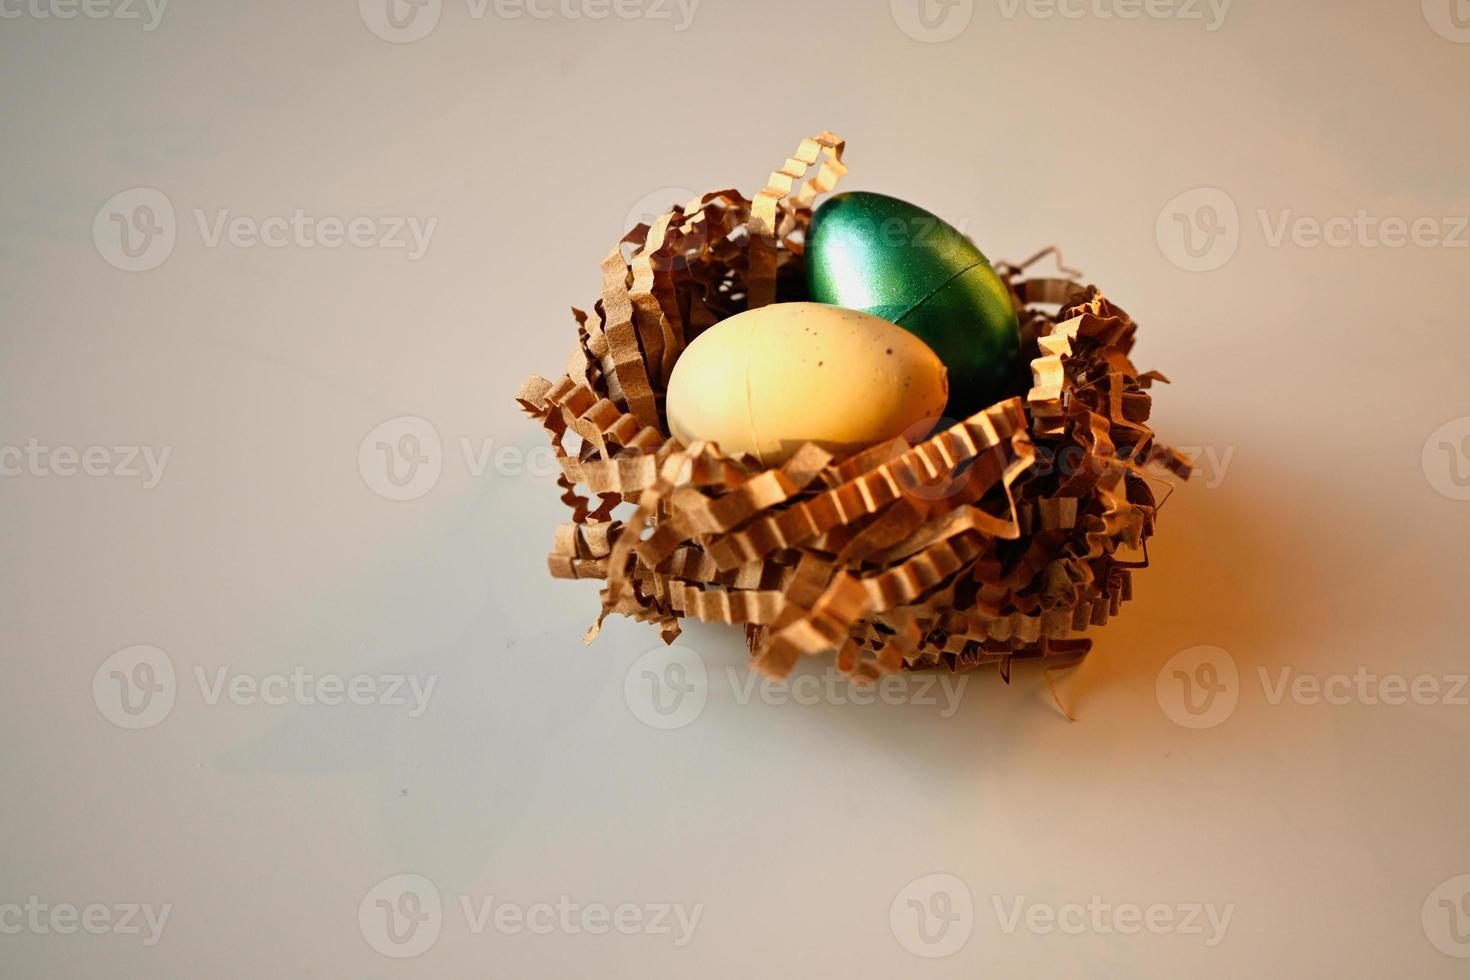 Colored Easter eggs, in a beautiful plate. Chocolate Easter eggs in a natural straw nest photo